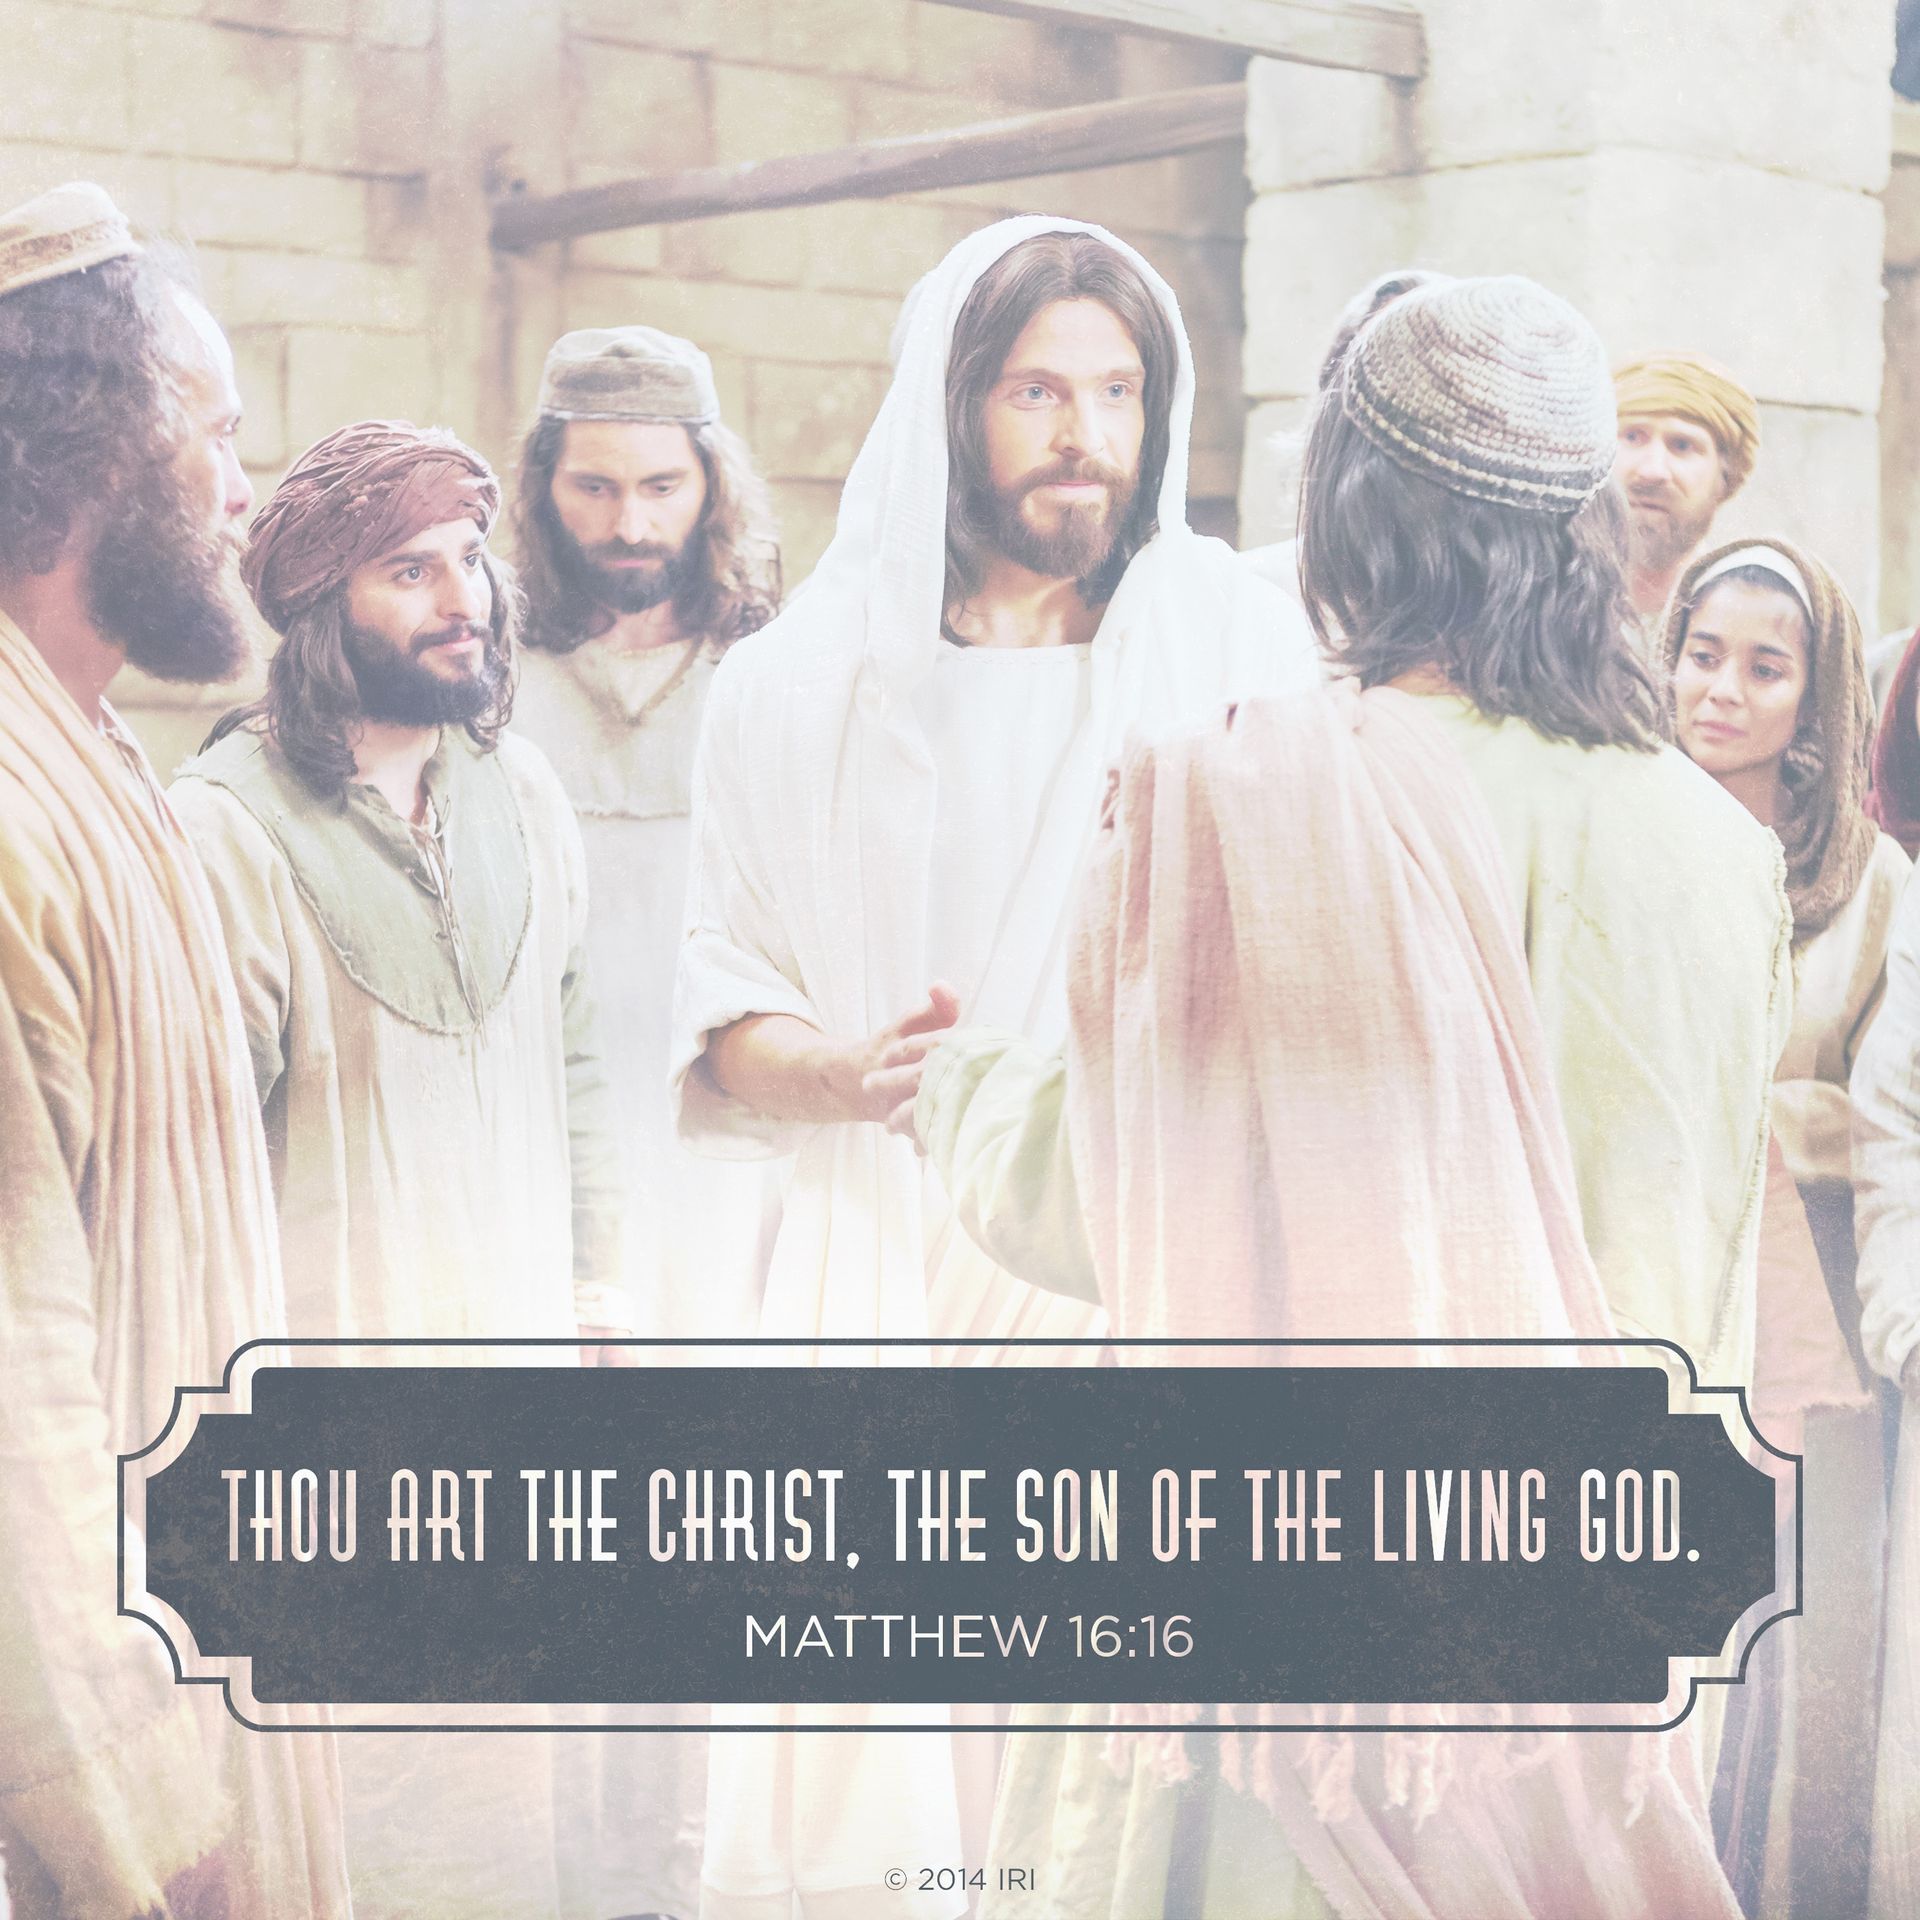 “Thou art the Christ, the Son of the living God.”—Matthew 16:16